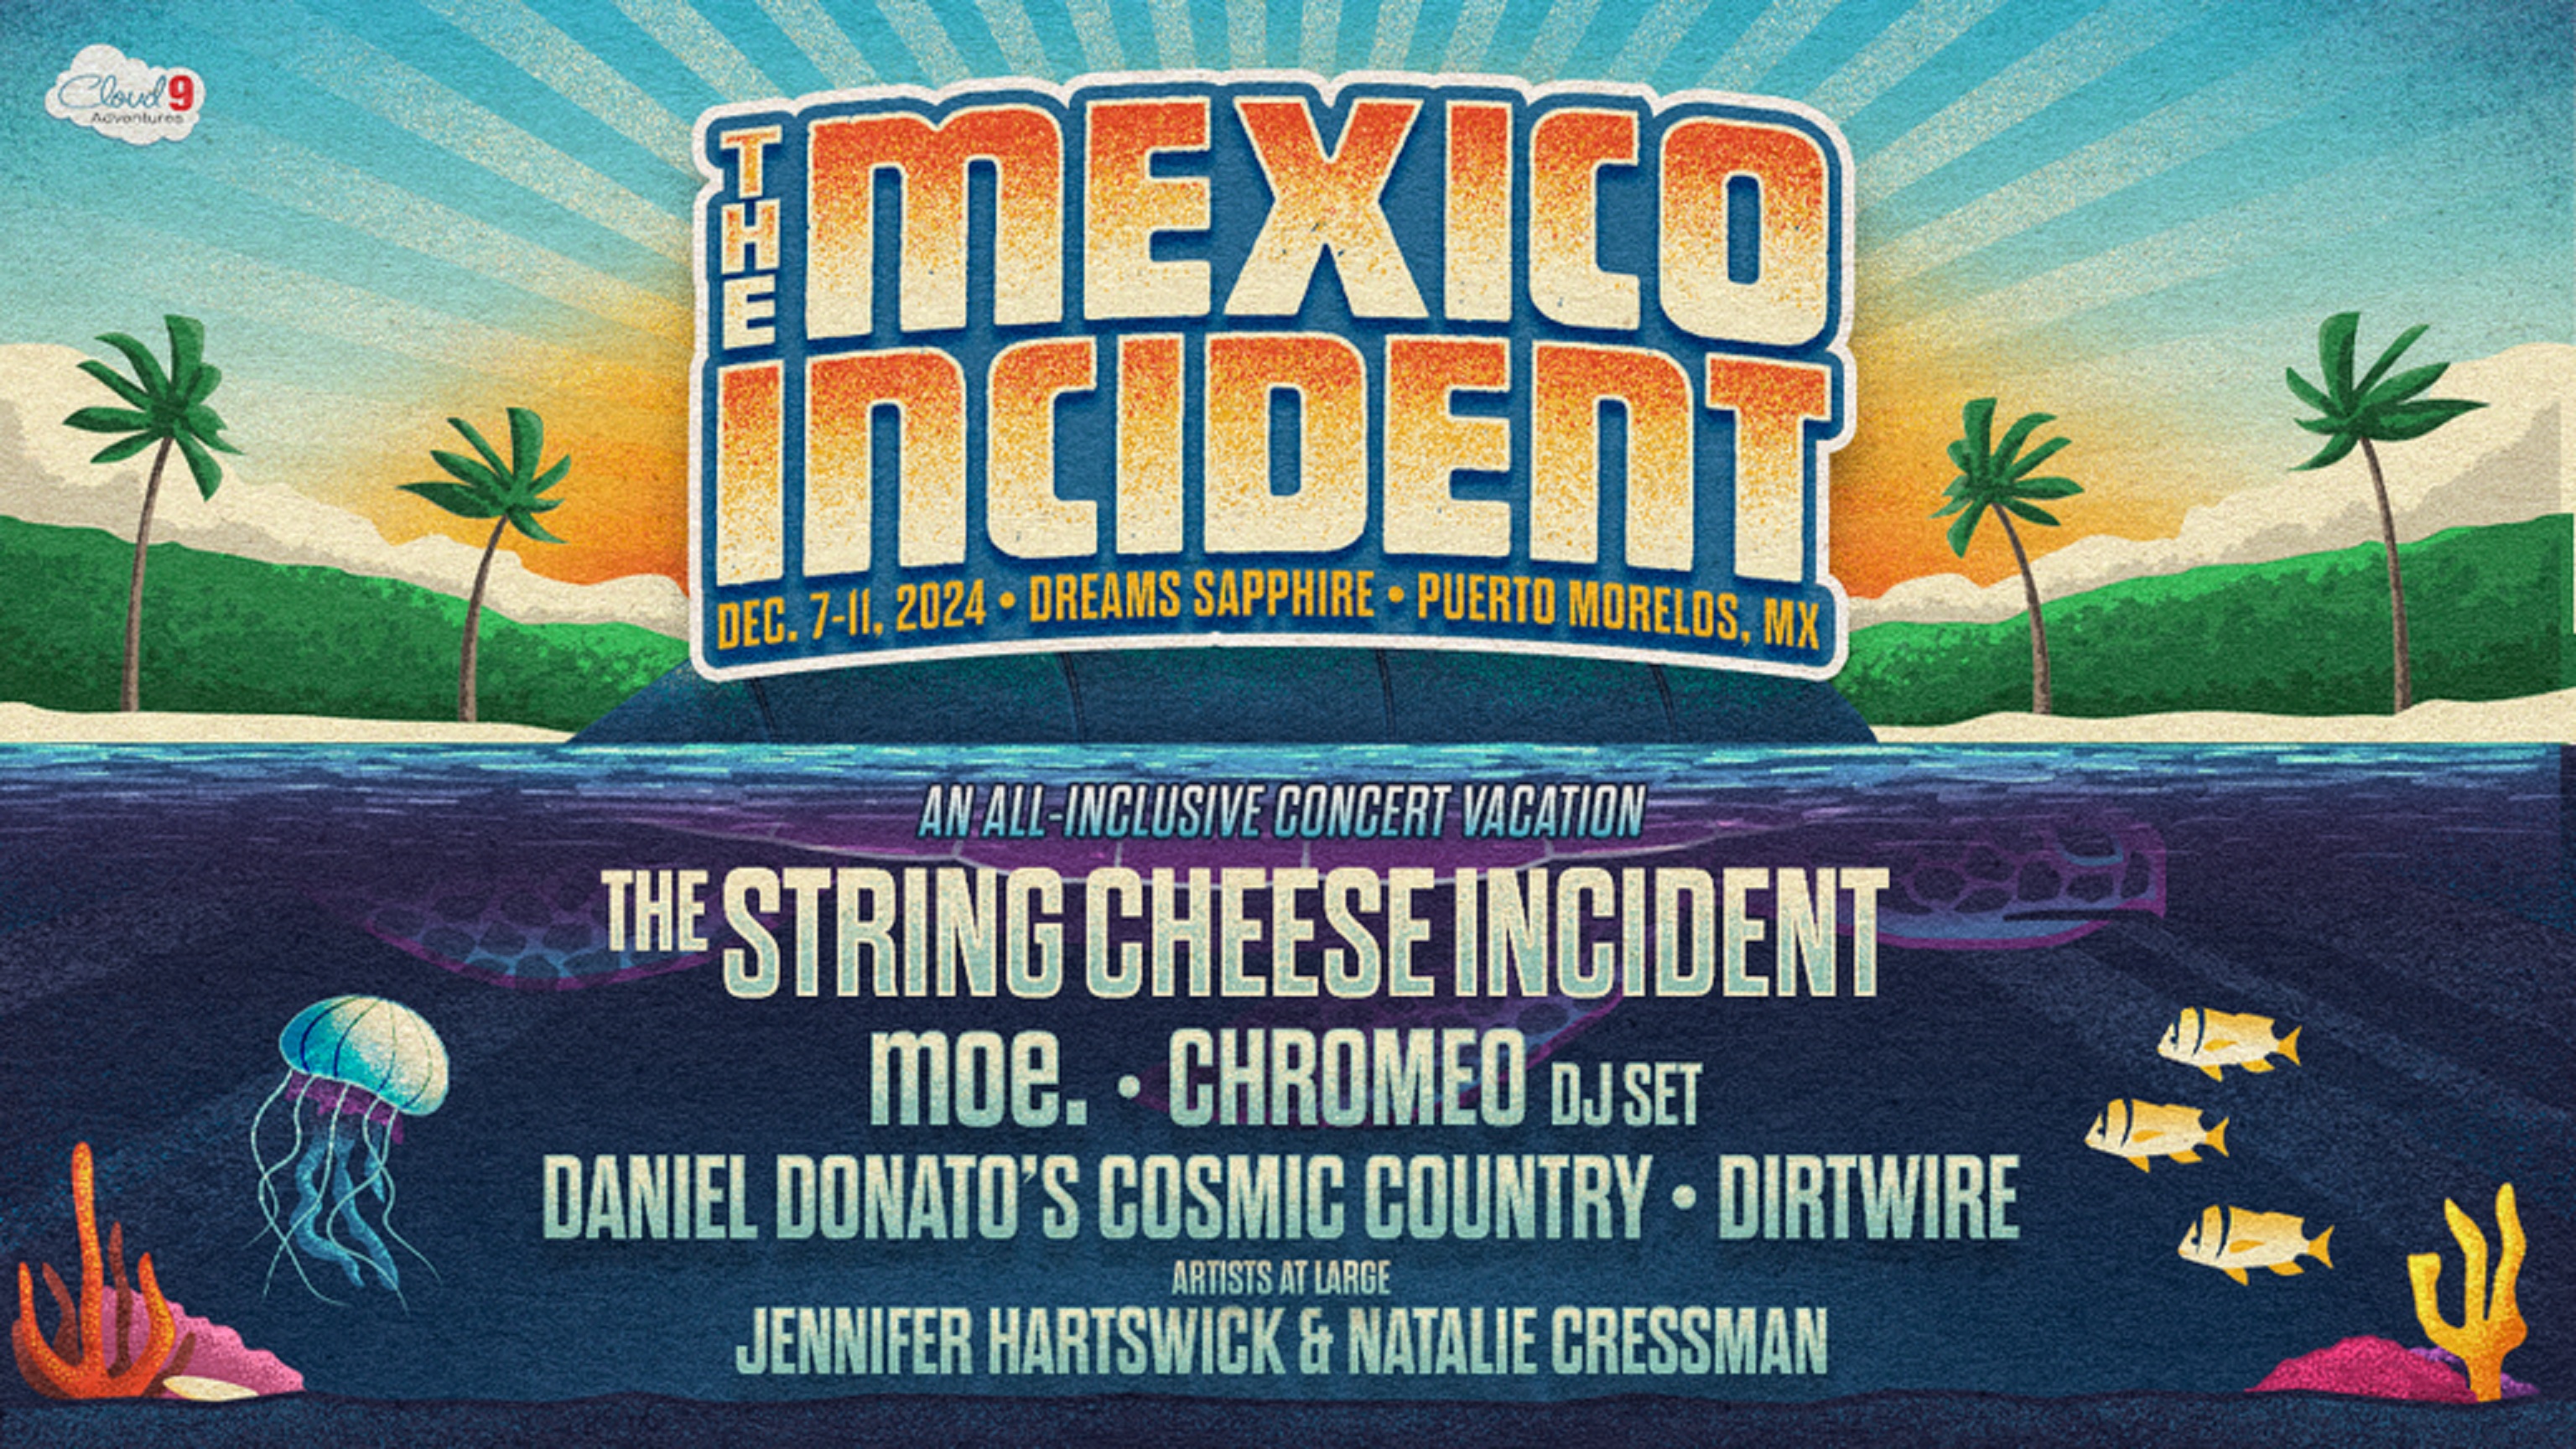 The String Cheese Incident announces "The Mexico Incident" - all inclusive destination concert vacation